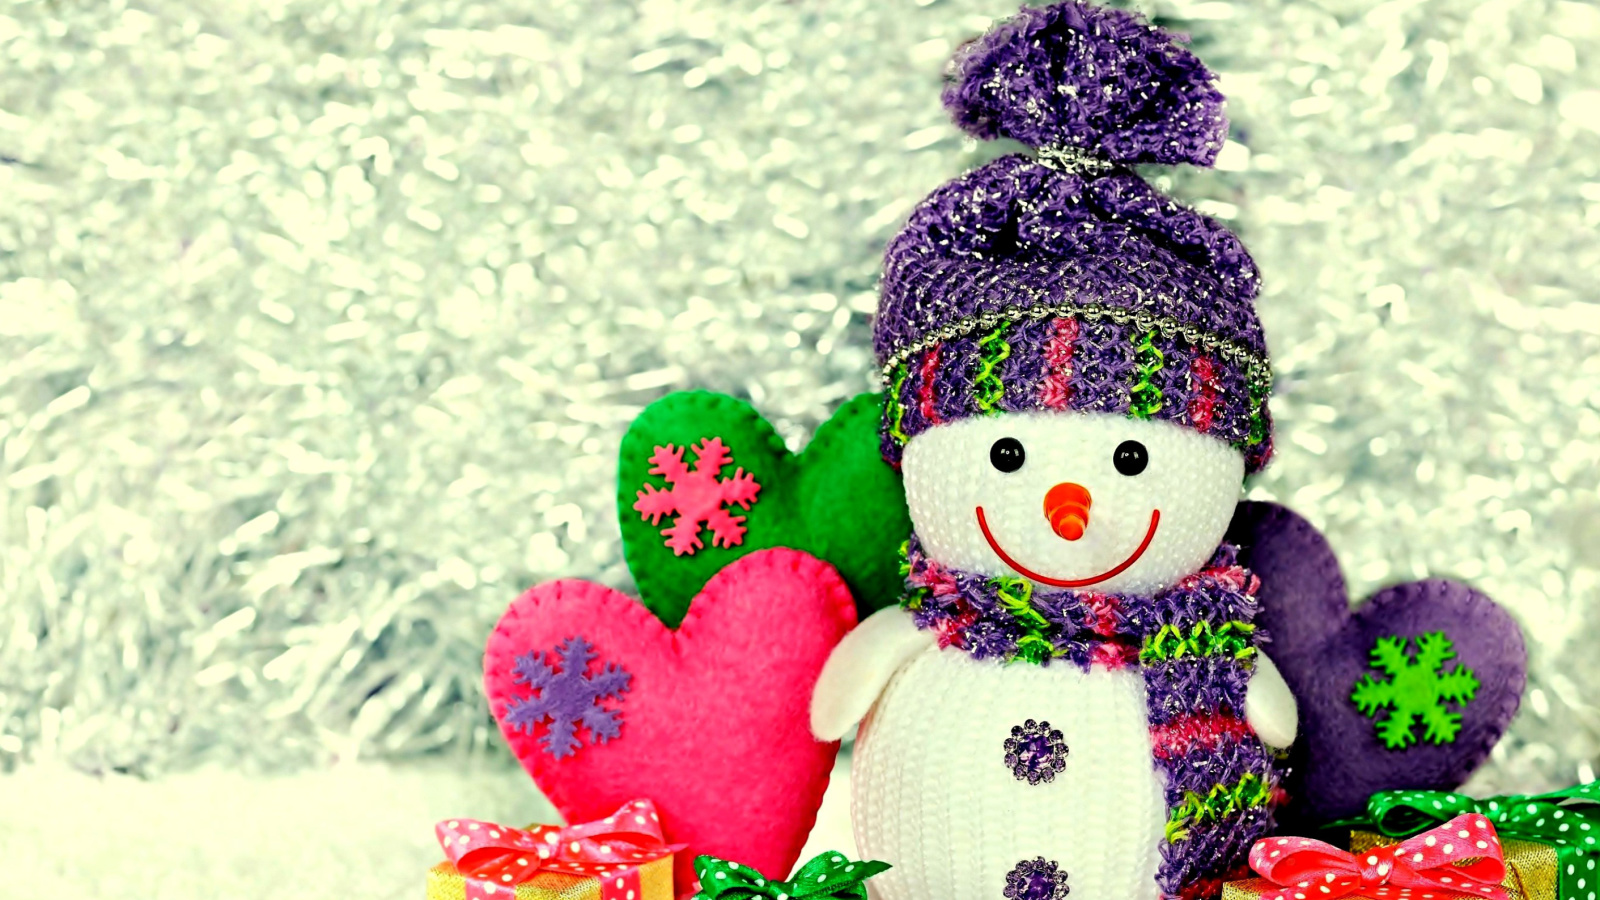 Homemade Snowman with Gifts wallpaper 1600x900